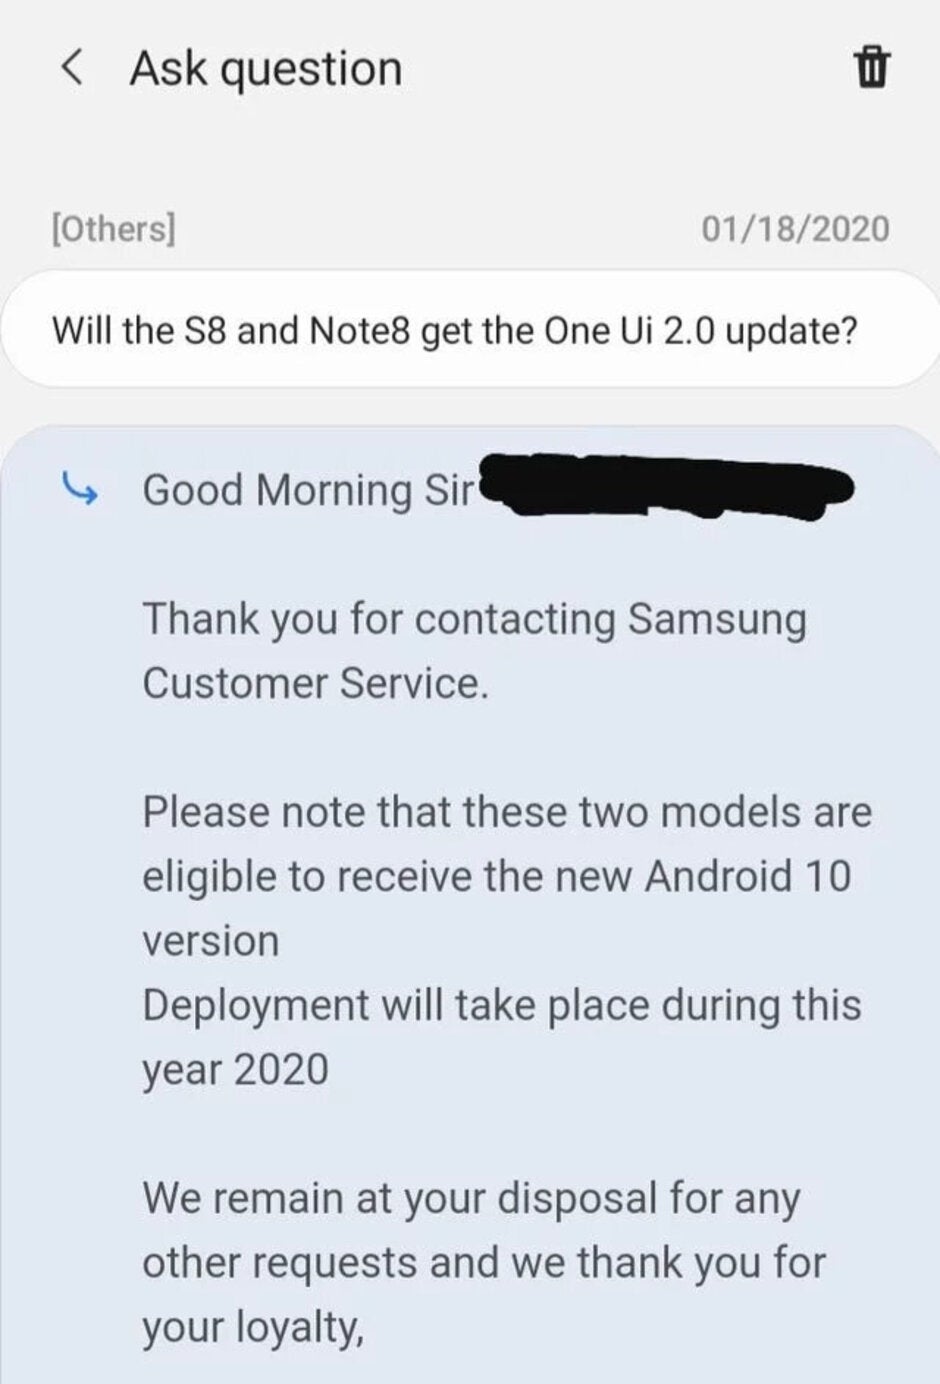 Samsung reps insist Galaxy S8 and Note 8 will receive Android 10 updates